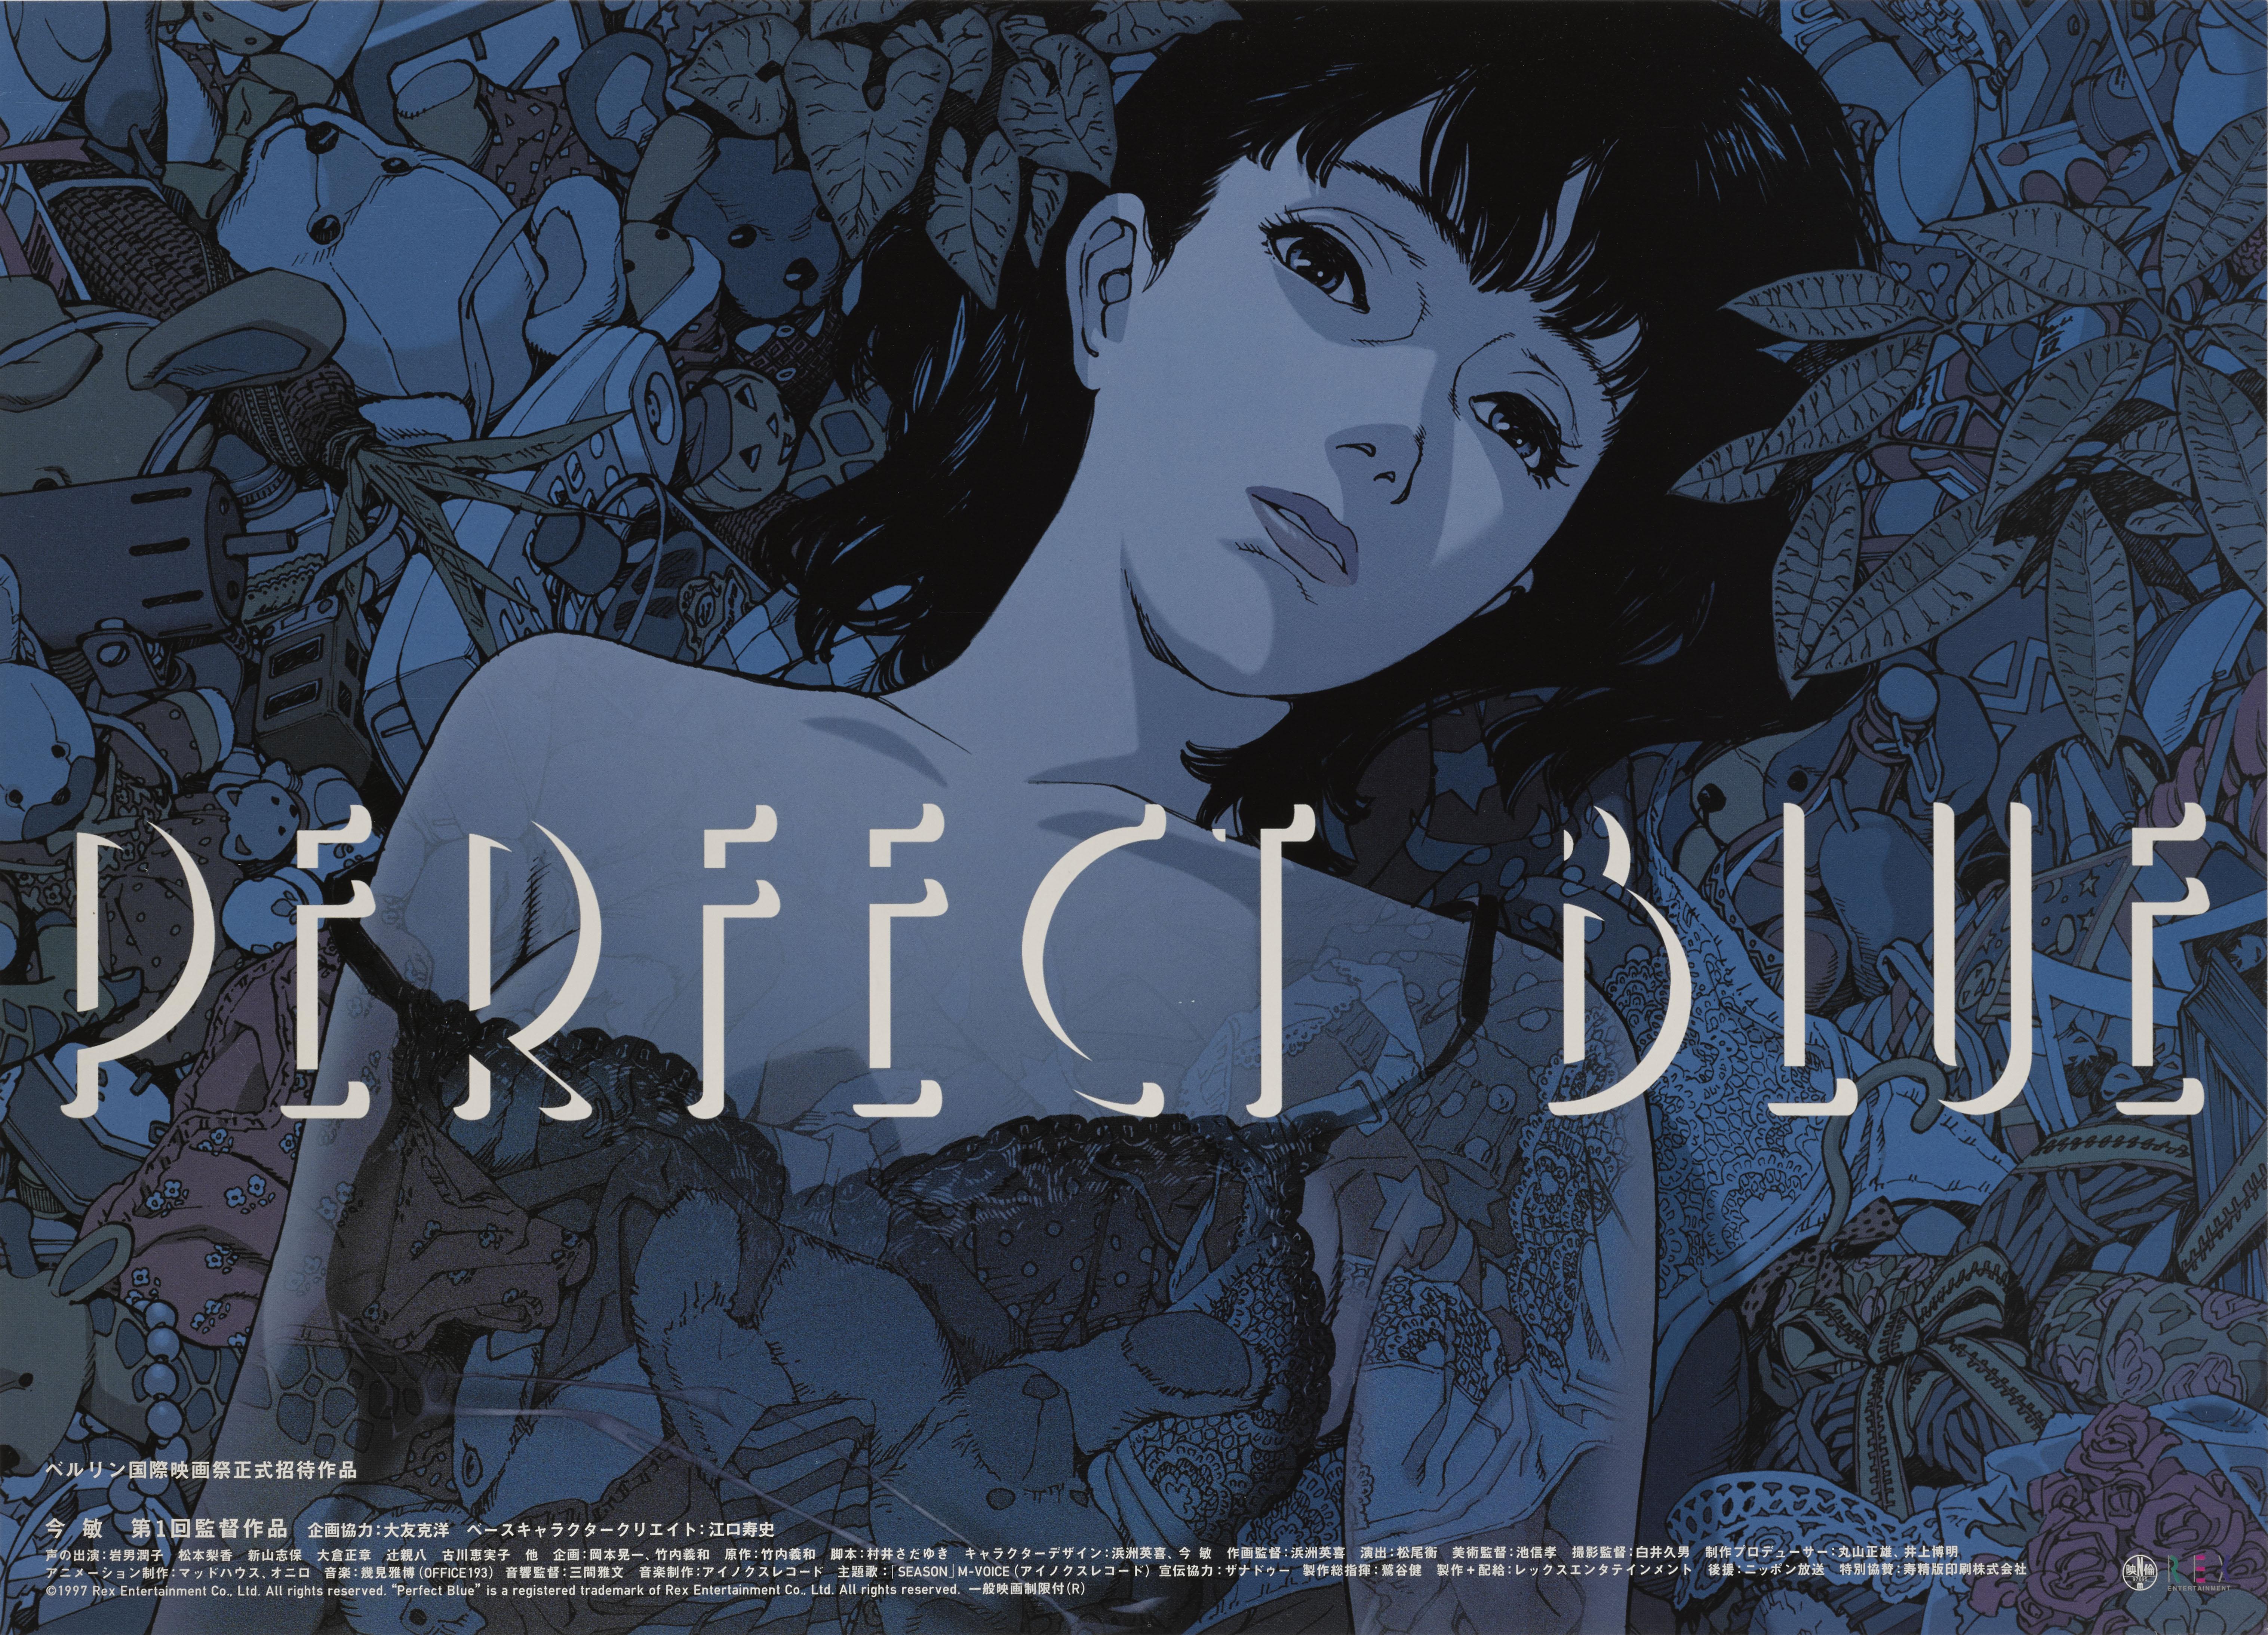 Original Japanese film poster from the 1997 Animation Pafekuto Buru / Perfect Blue.
This film was directed Satoshi Kon.
This poster is unfolded and conservation paper backed and would be shipped flat.